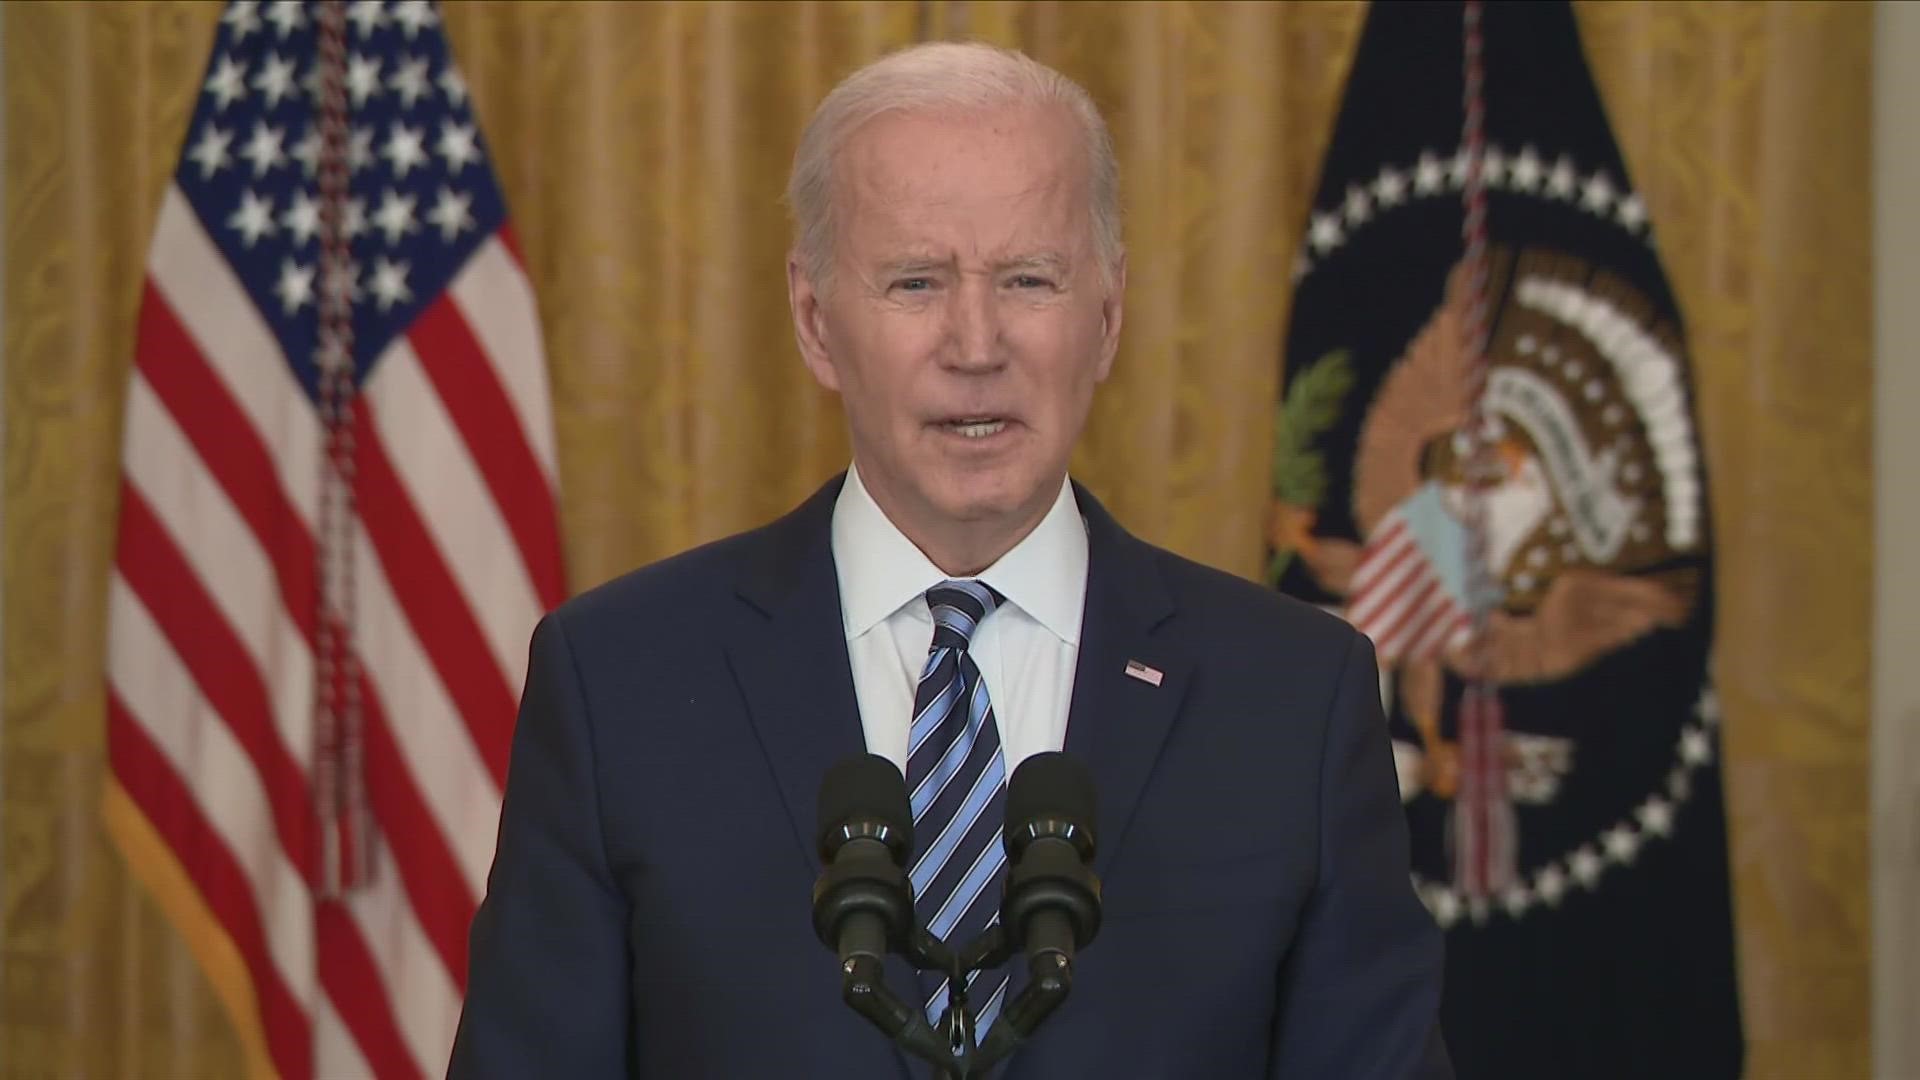 Biden also said the US has been working with private sector companies for "months" to strengthen the company's defenses against potential cyberattacks.